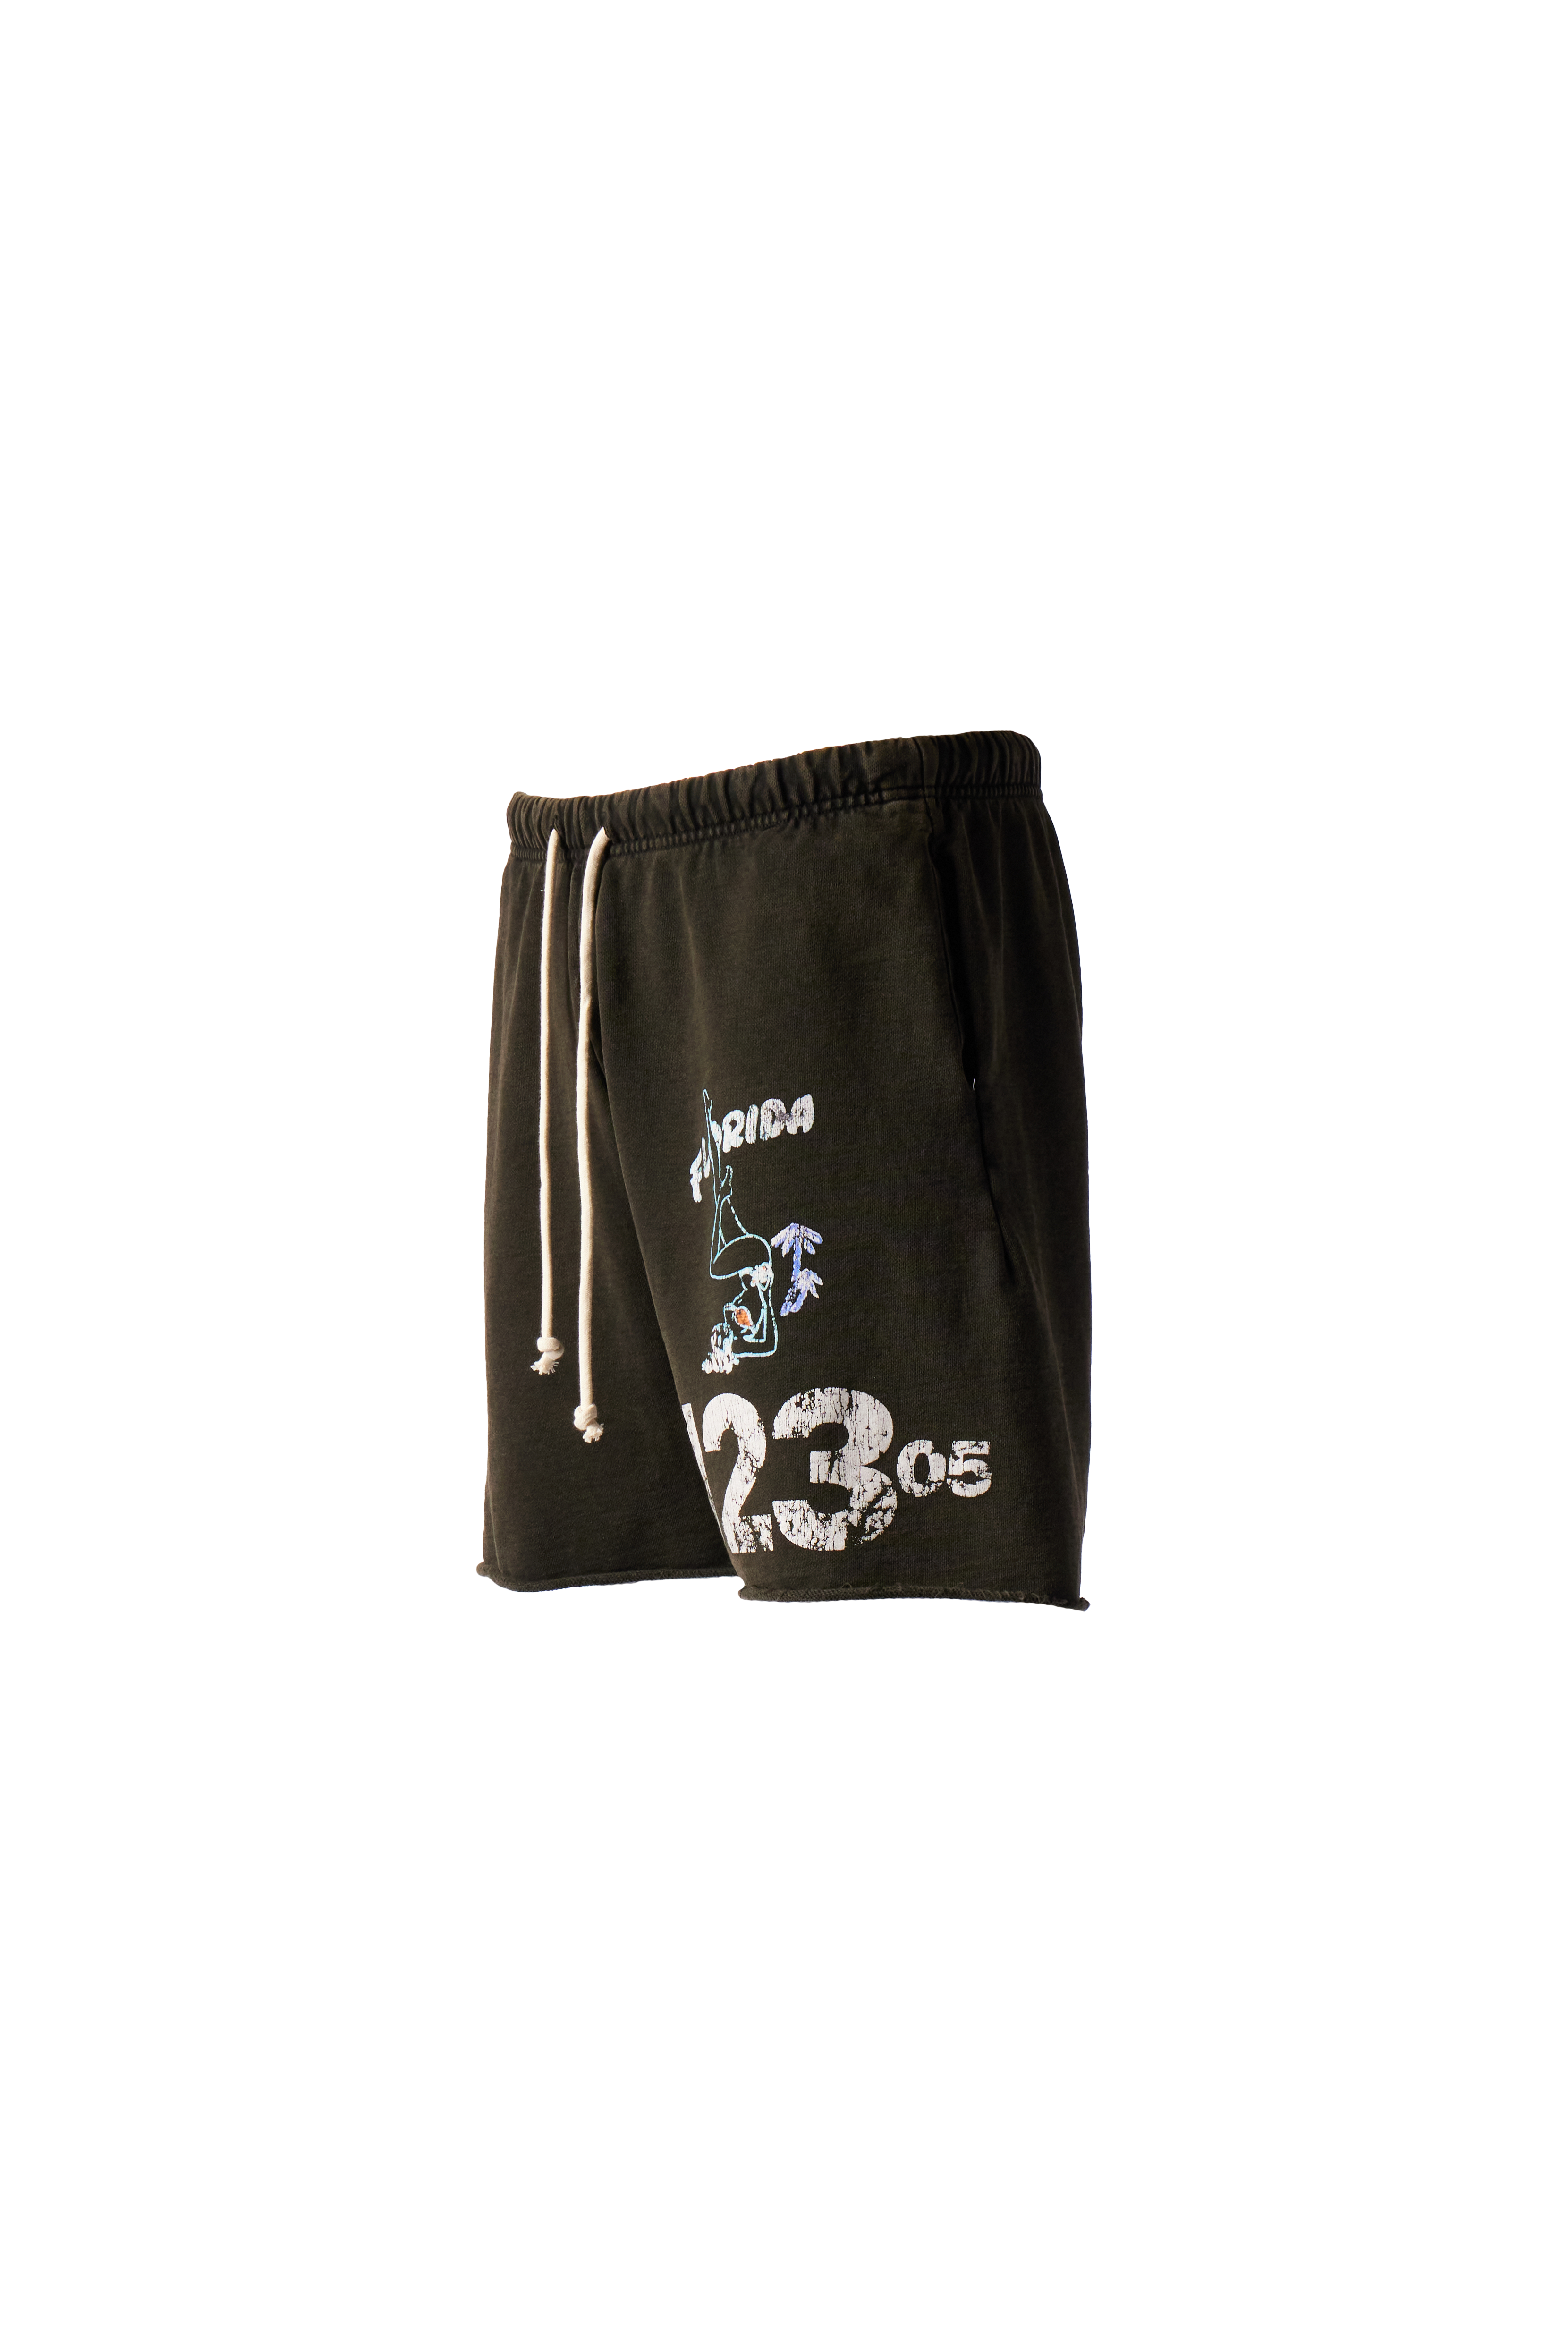 RRR123 - Outside of the Garden Gymbag Shorts product image